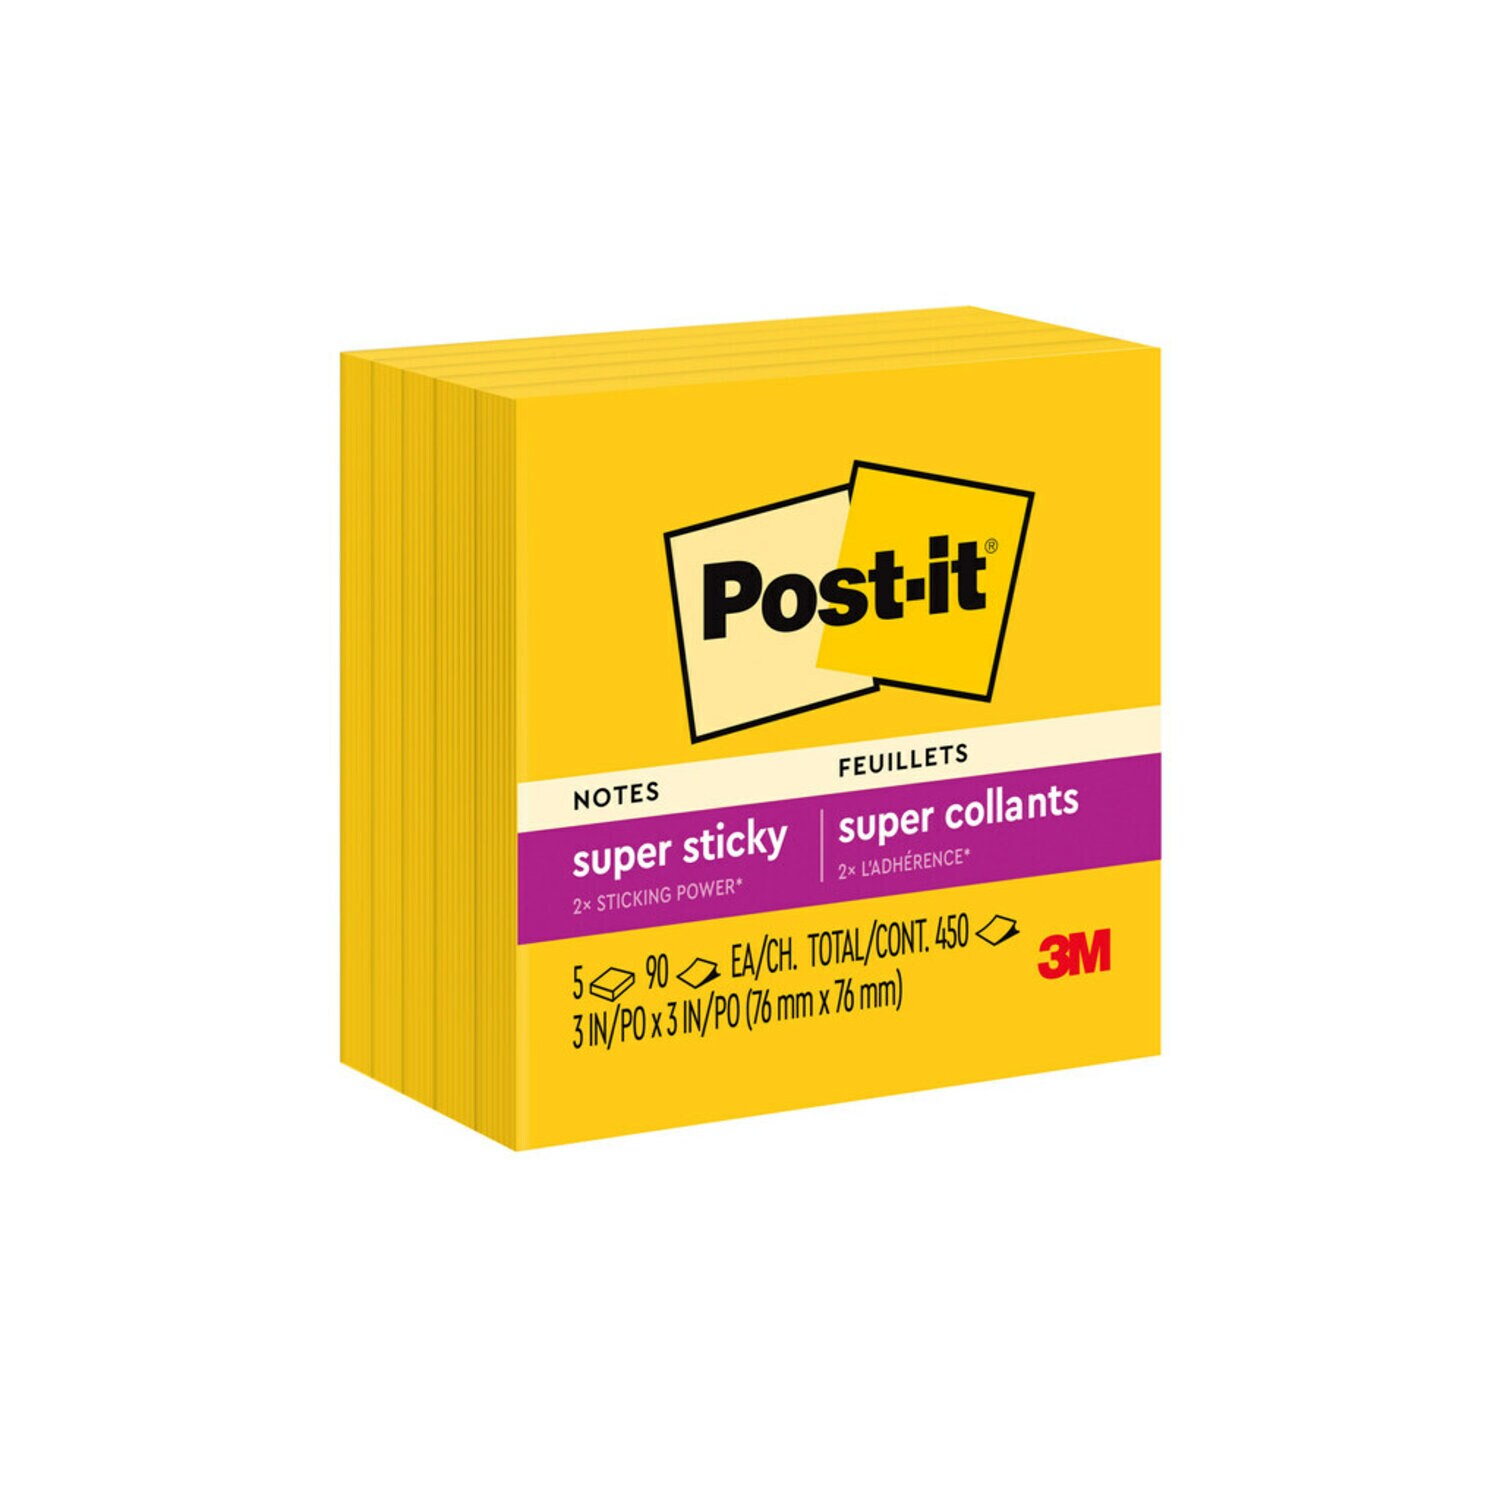 7100230193 - Post-it Notes 654-5SSY, 3 in x 3 in